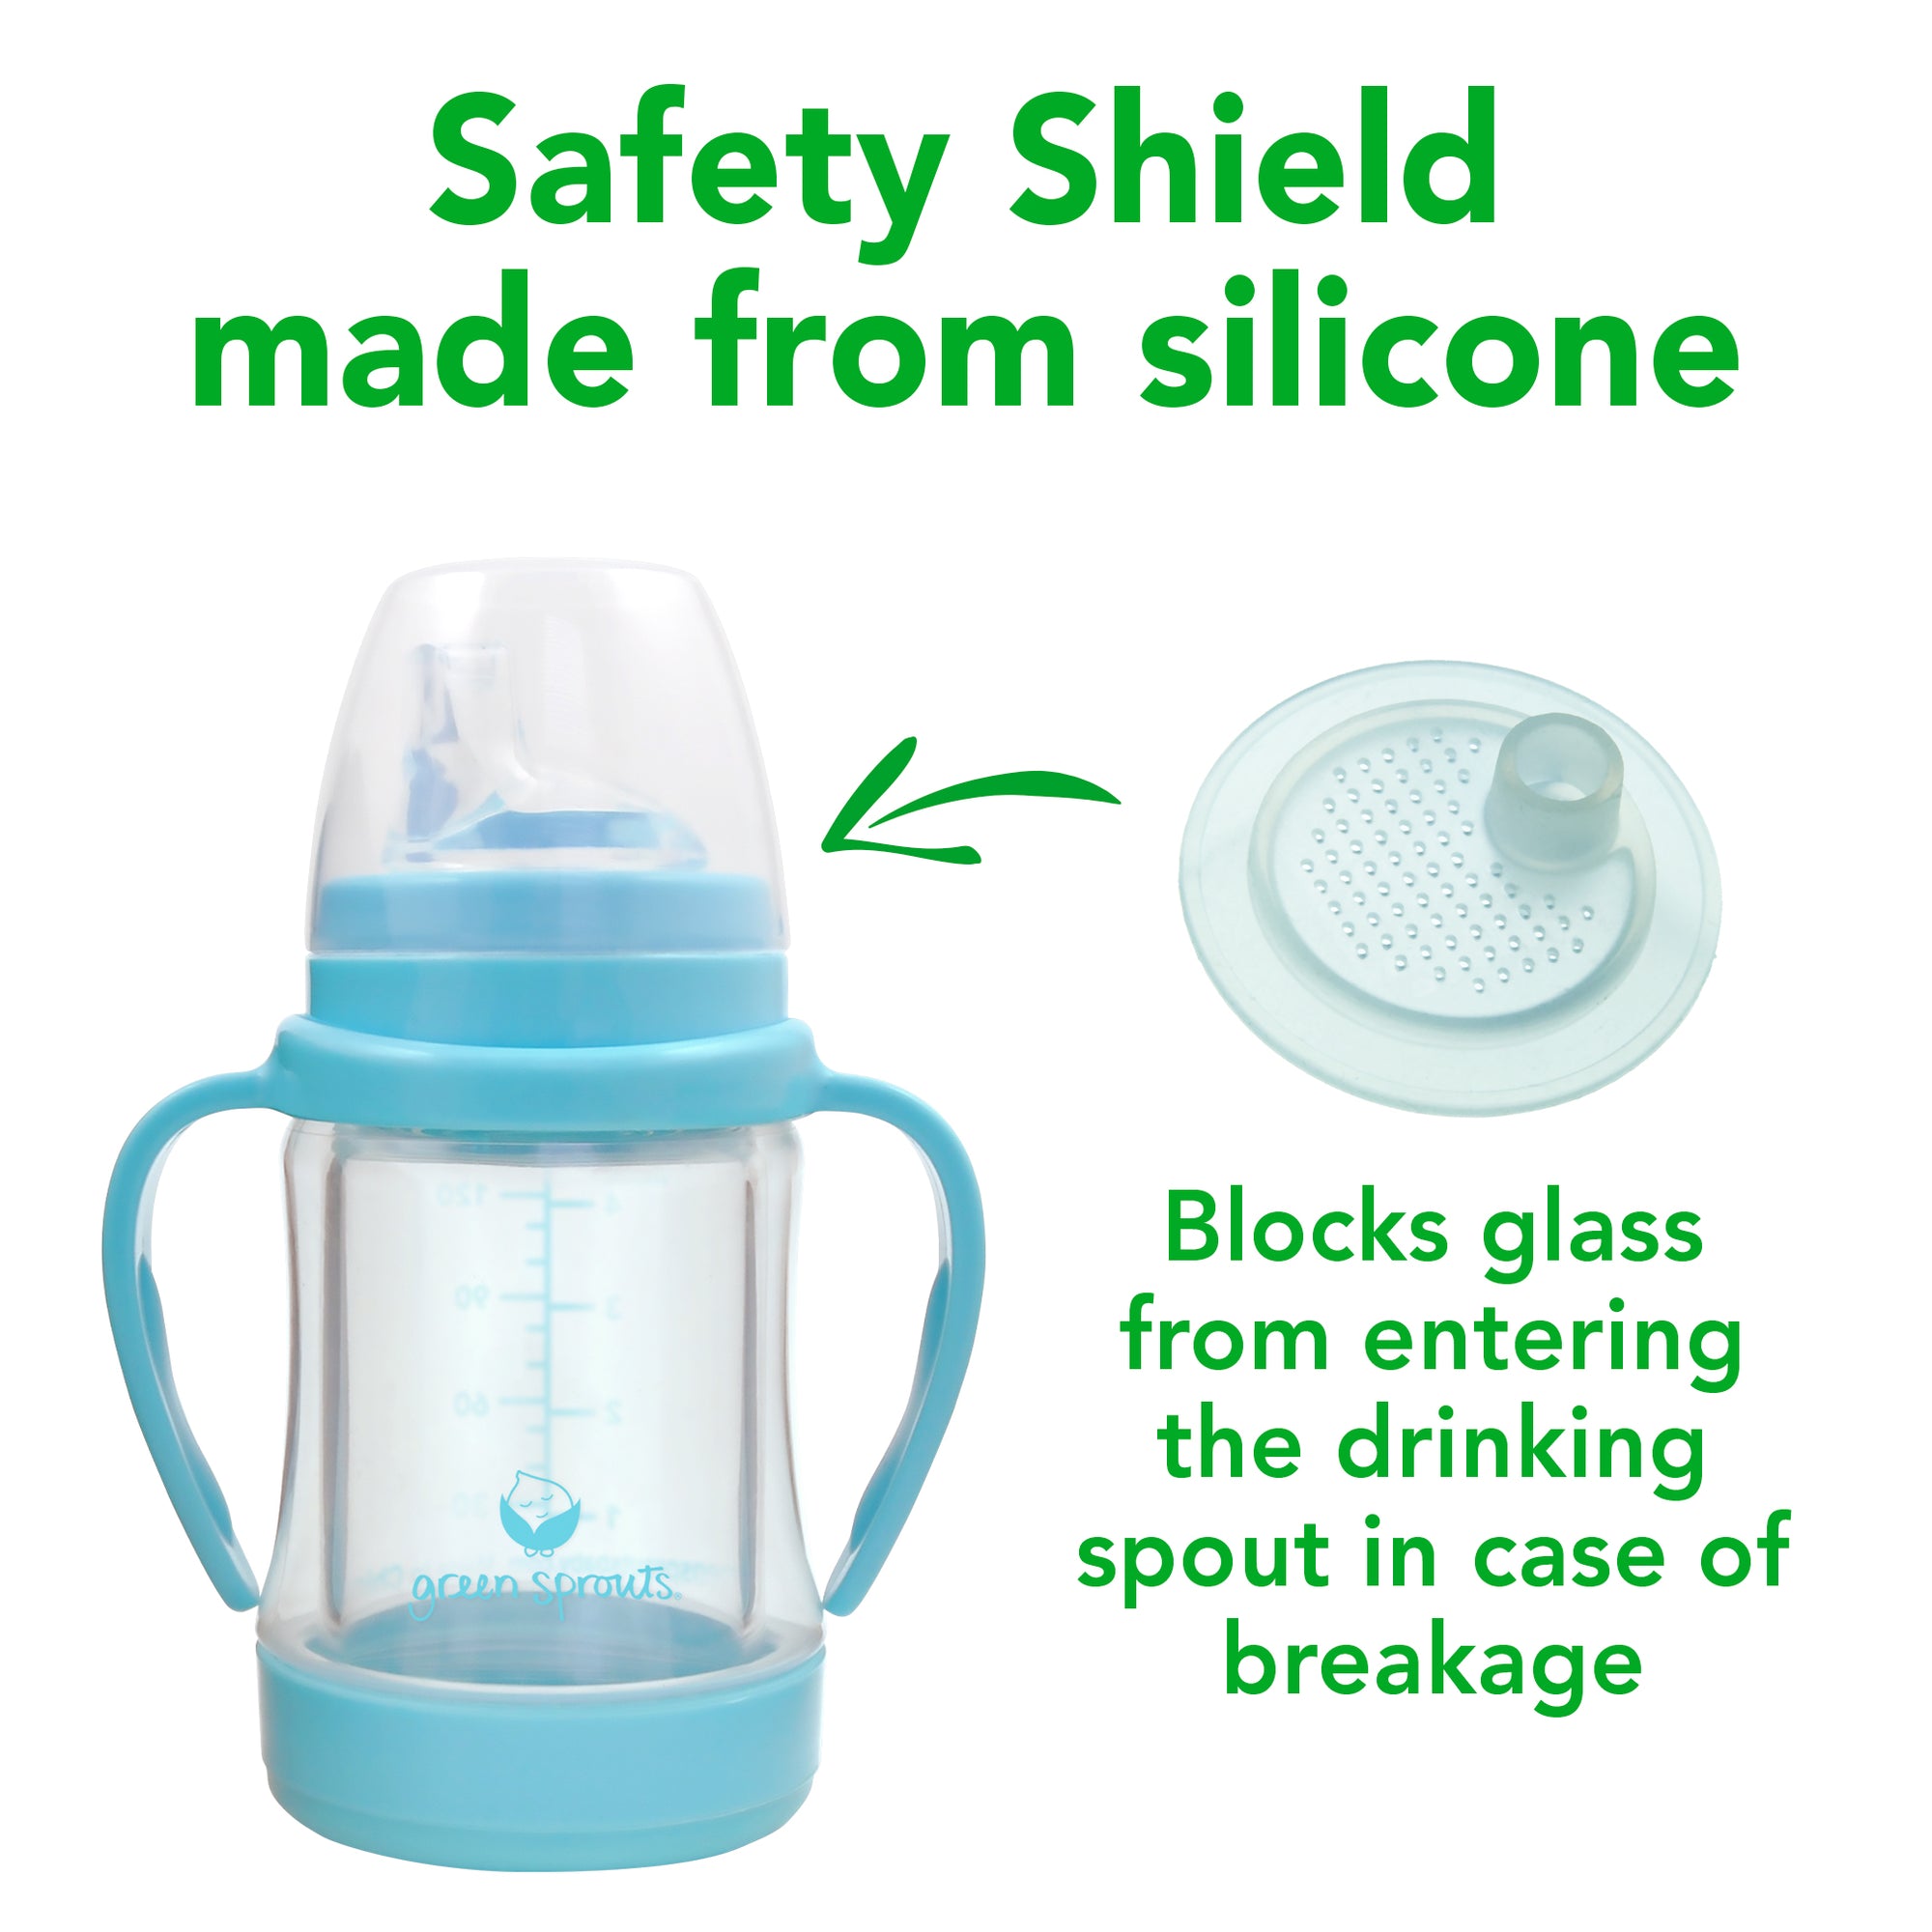 Safety Shield made from Silicone